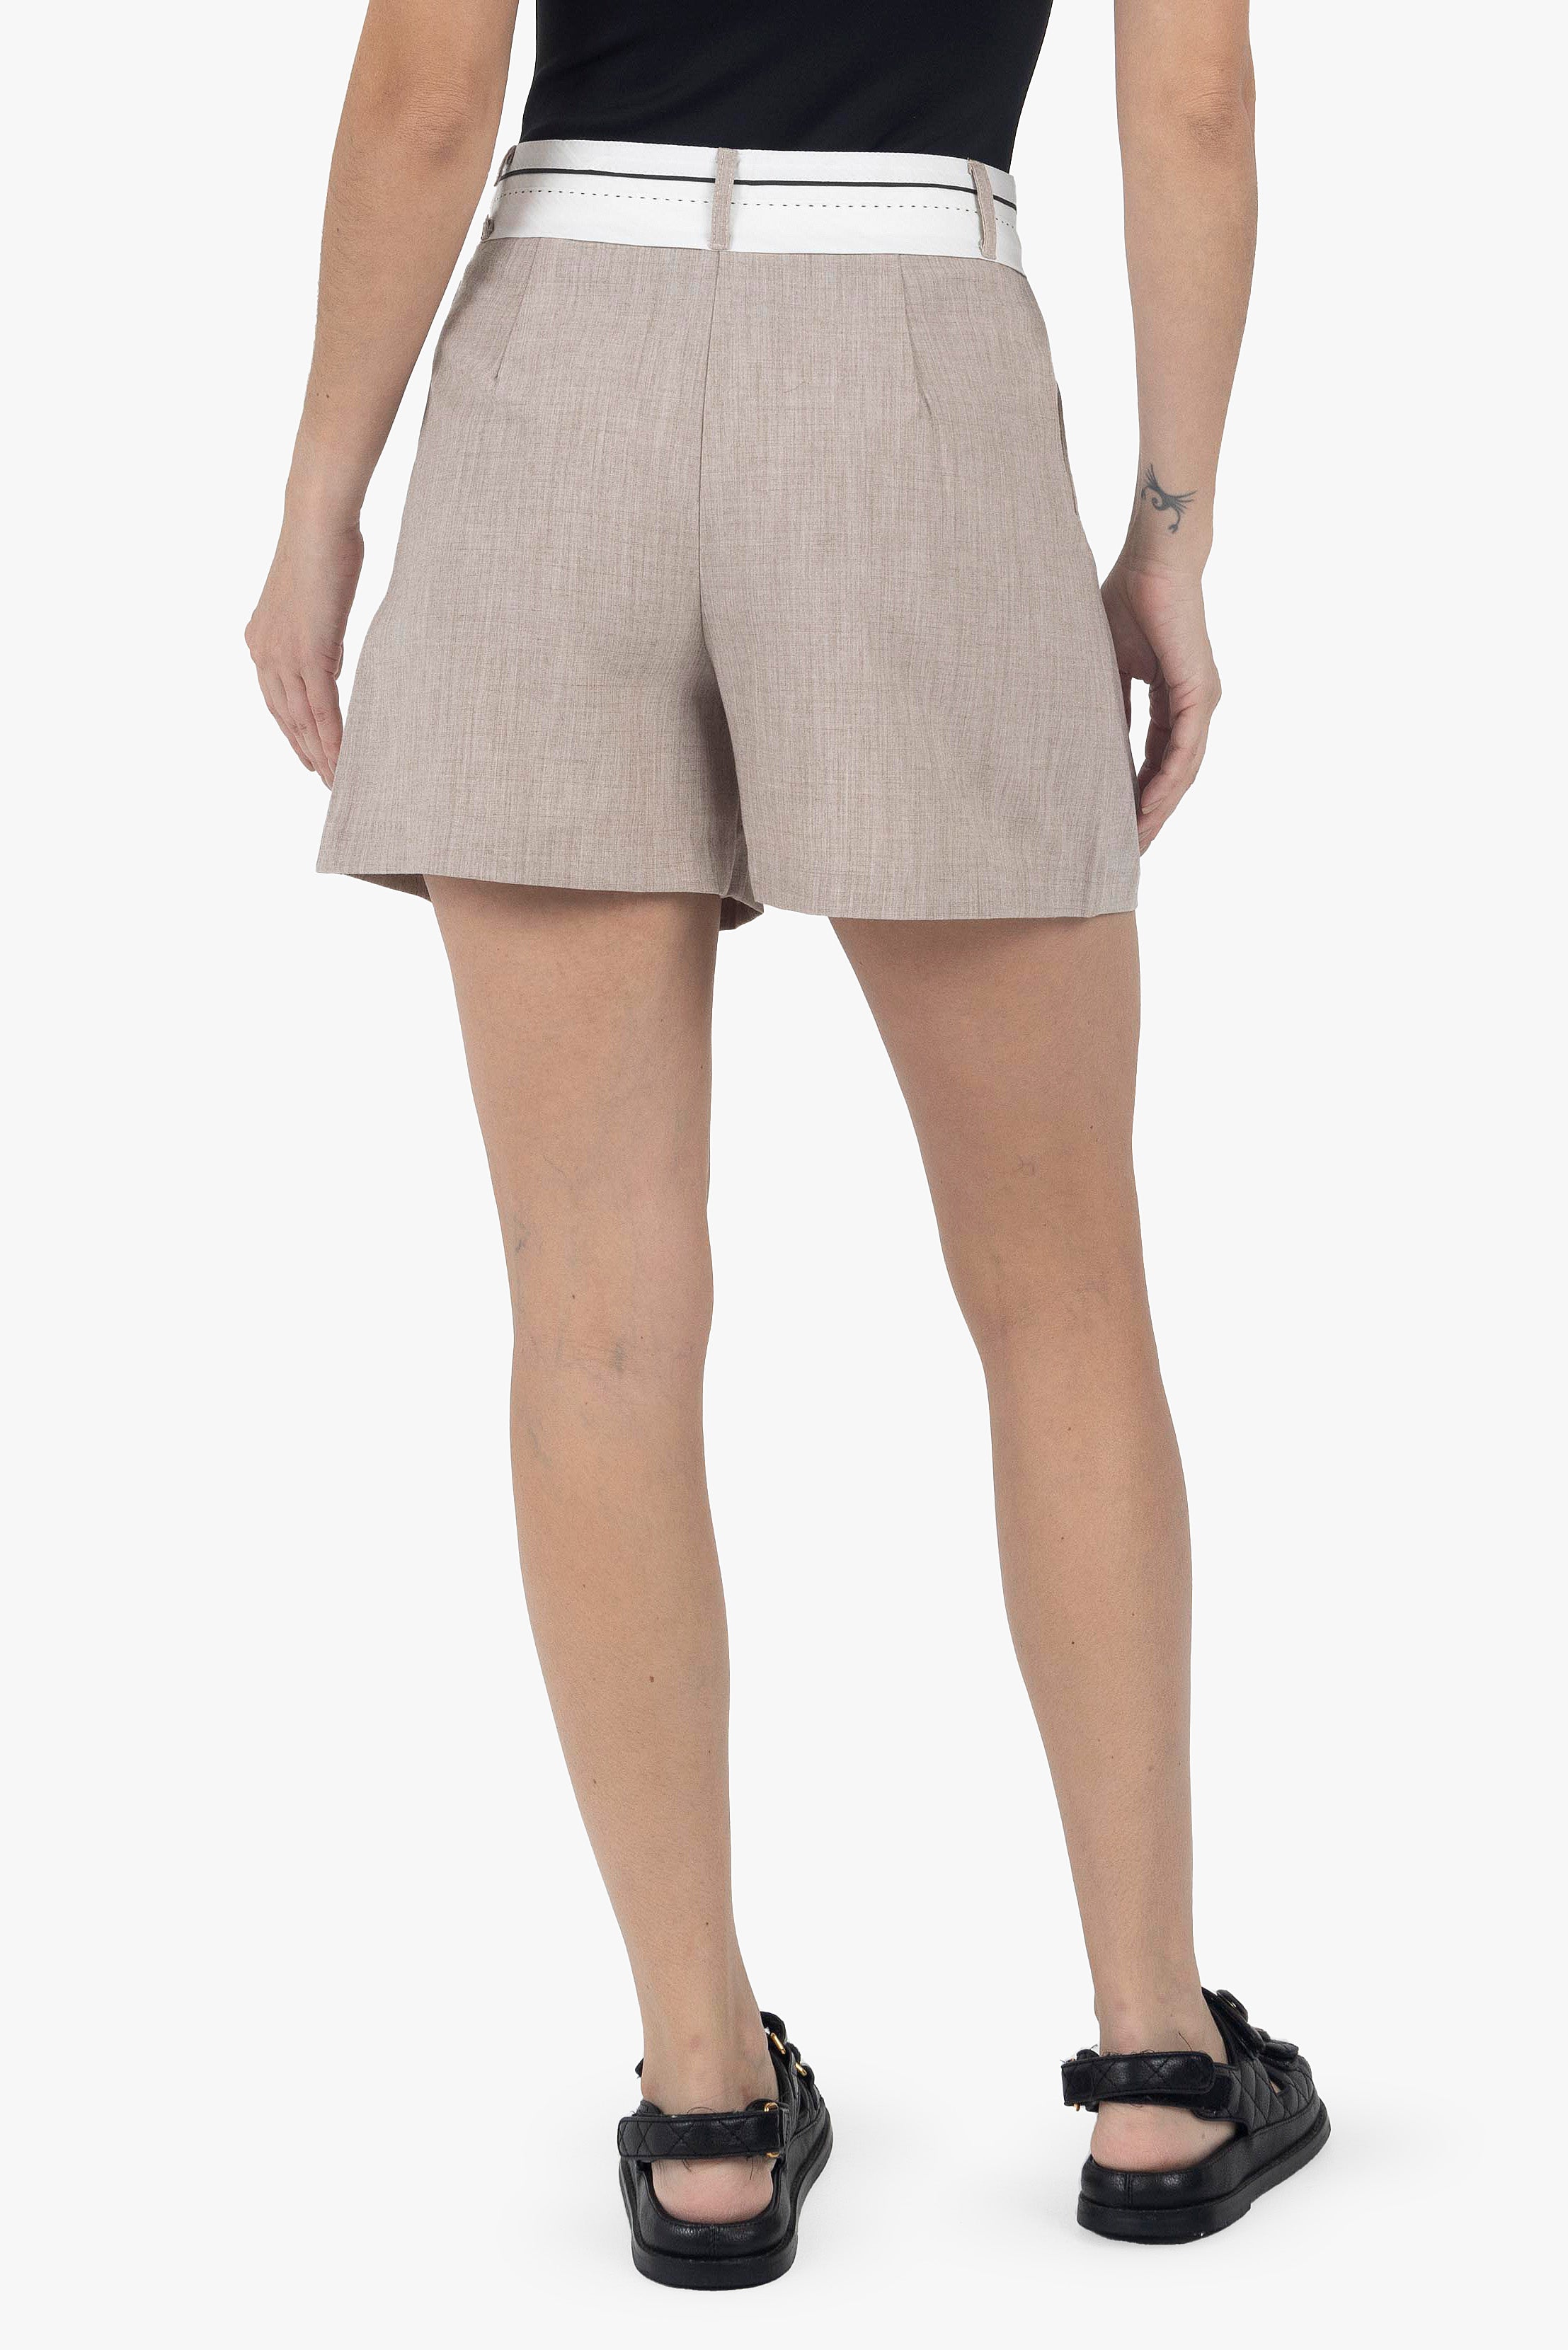 COOL WAIST TAUPE SHORTS